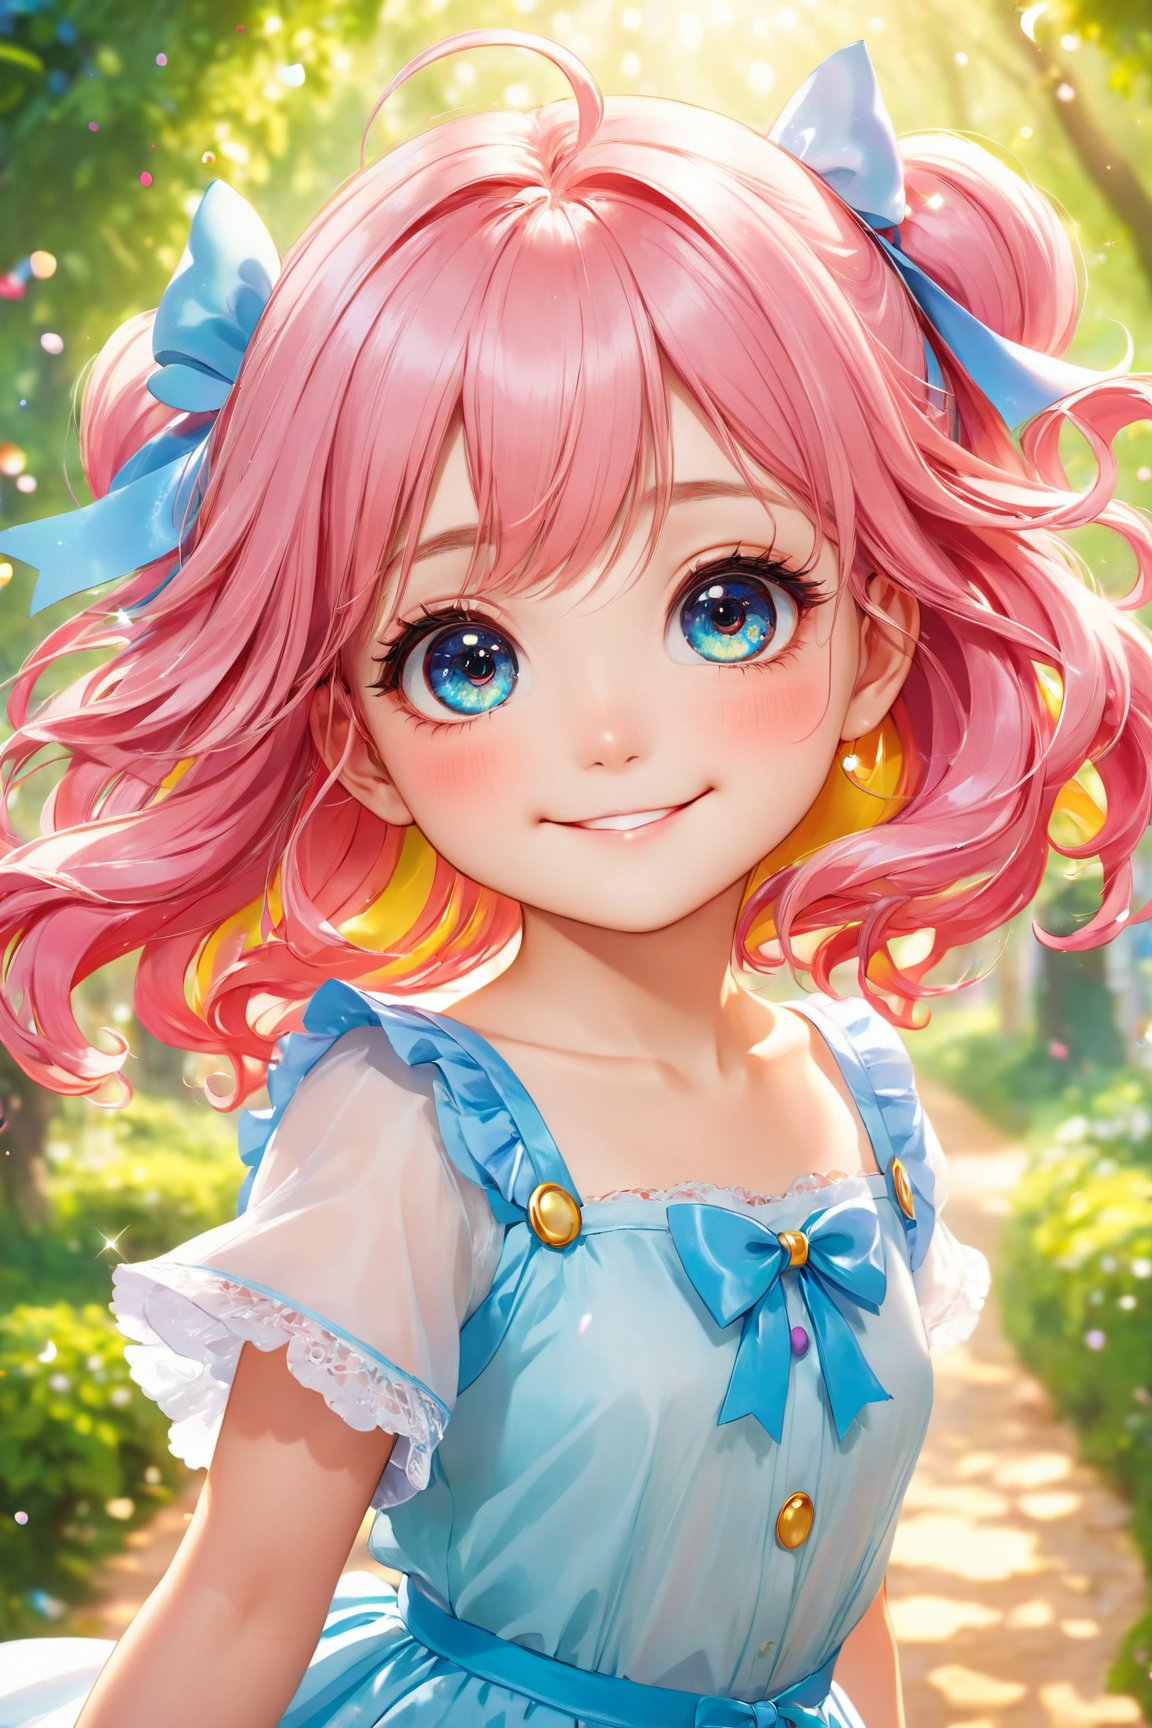 (best quality, 4k, 8k, highres, masterpiece:1.2), cute anime girl, large eyes, detailed eyelashes, rosy cheeks, innocent smile, playful pose, colorful hair, flowing ribbon, sparkling eyes, flawless skin, vibrant colors, fantasy background, soft shading, smooth lines, anime style, exaggerated expressions, expressive eyes, cheerful atmosphere, whimsical details, joyful personality, dynamic composition, ethereal lighting, magical elements, lively and energetic, storybook-like, childlike wonder, visual storytelling, sparkling highlights, vibrant and lively, playful and fun, fast-paced action, iconic and memorable, imaginative and playful, cute accessories, unique and eye-catching, adorable and charming